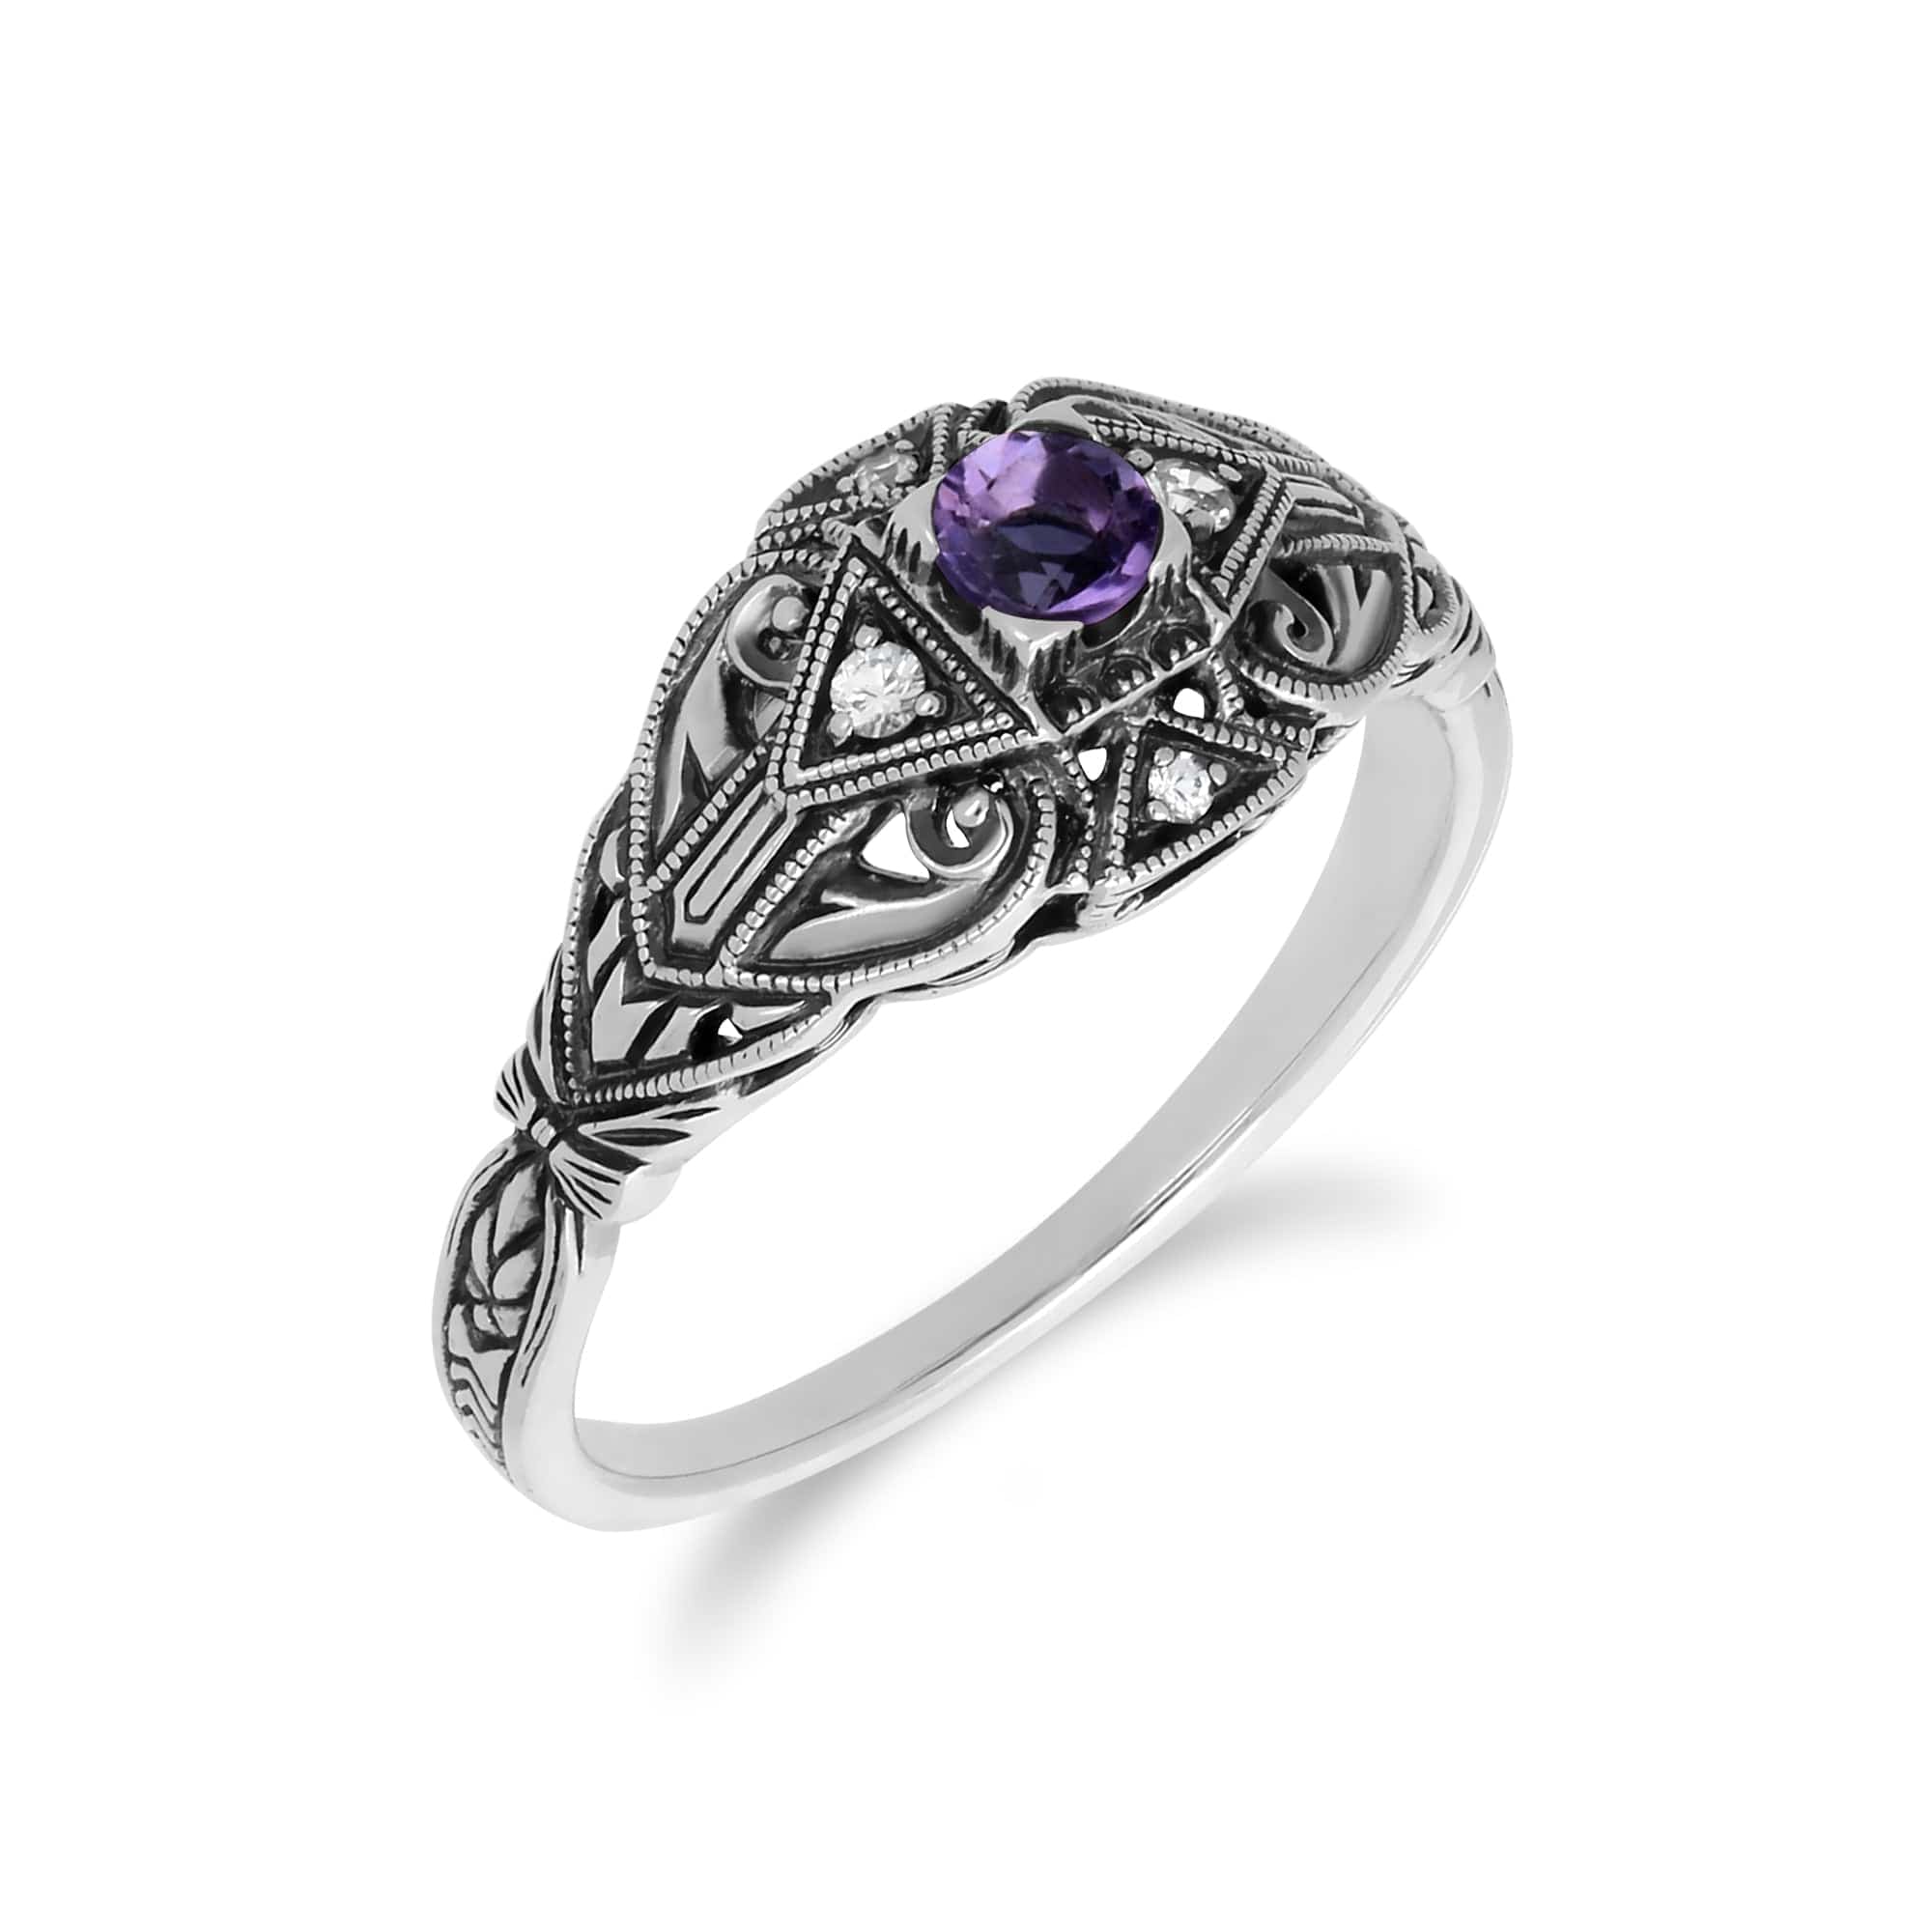 241R210302925 Art Deco Style Round Amethyst & White Topaz  Ring in 925 Sterling Silver 2